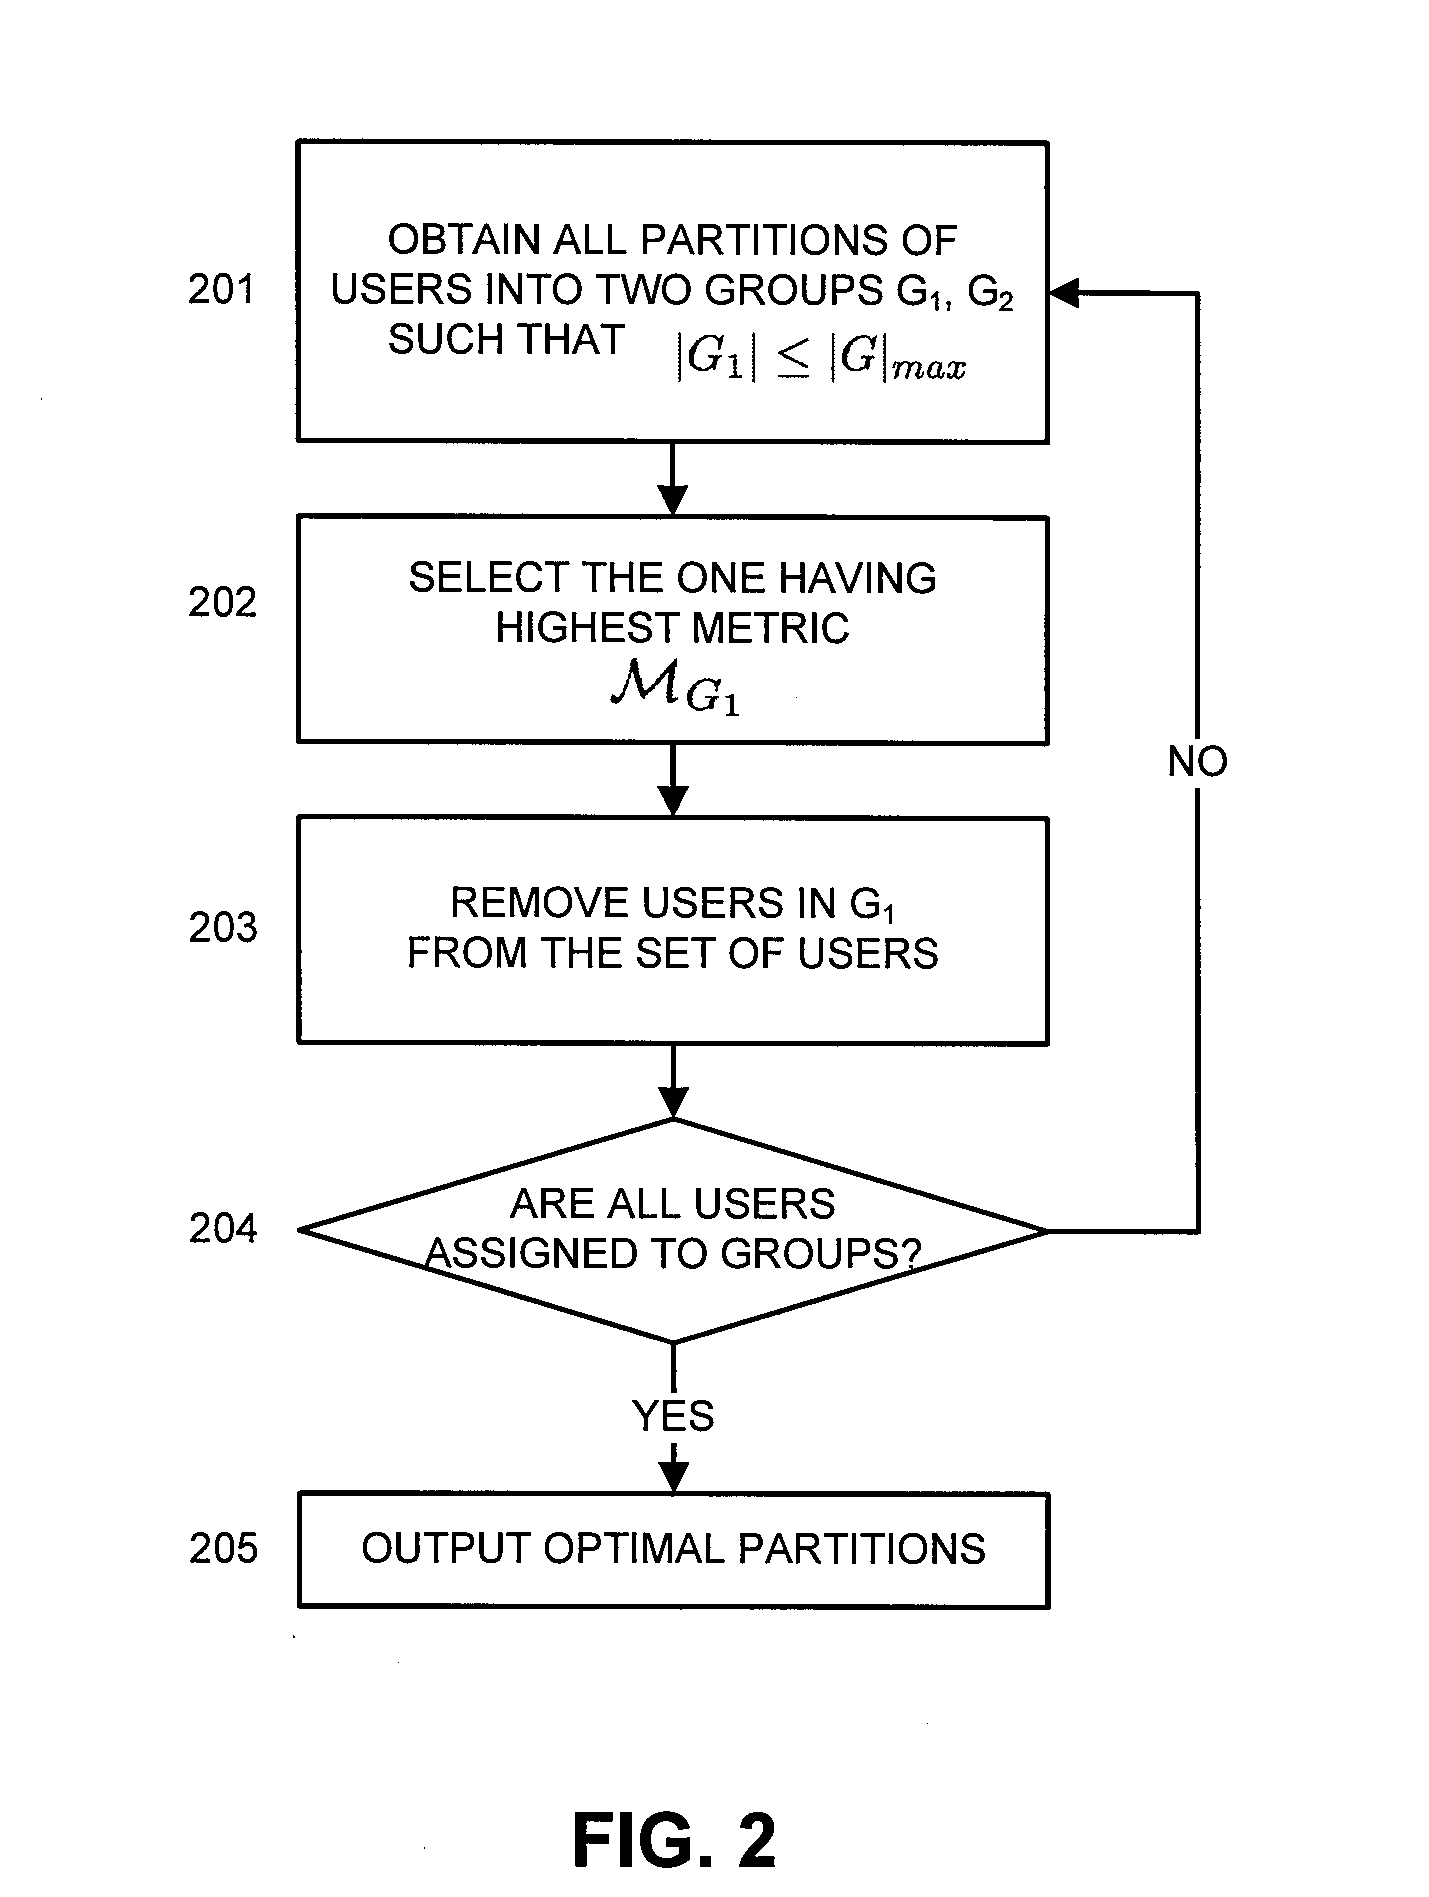 Group Decoder with Improved Partitioning for Multiple Antenna Multiuser Channel